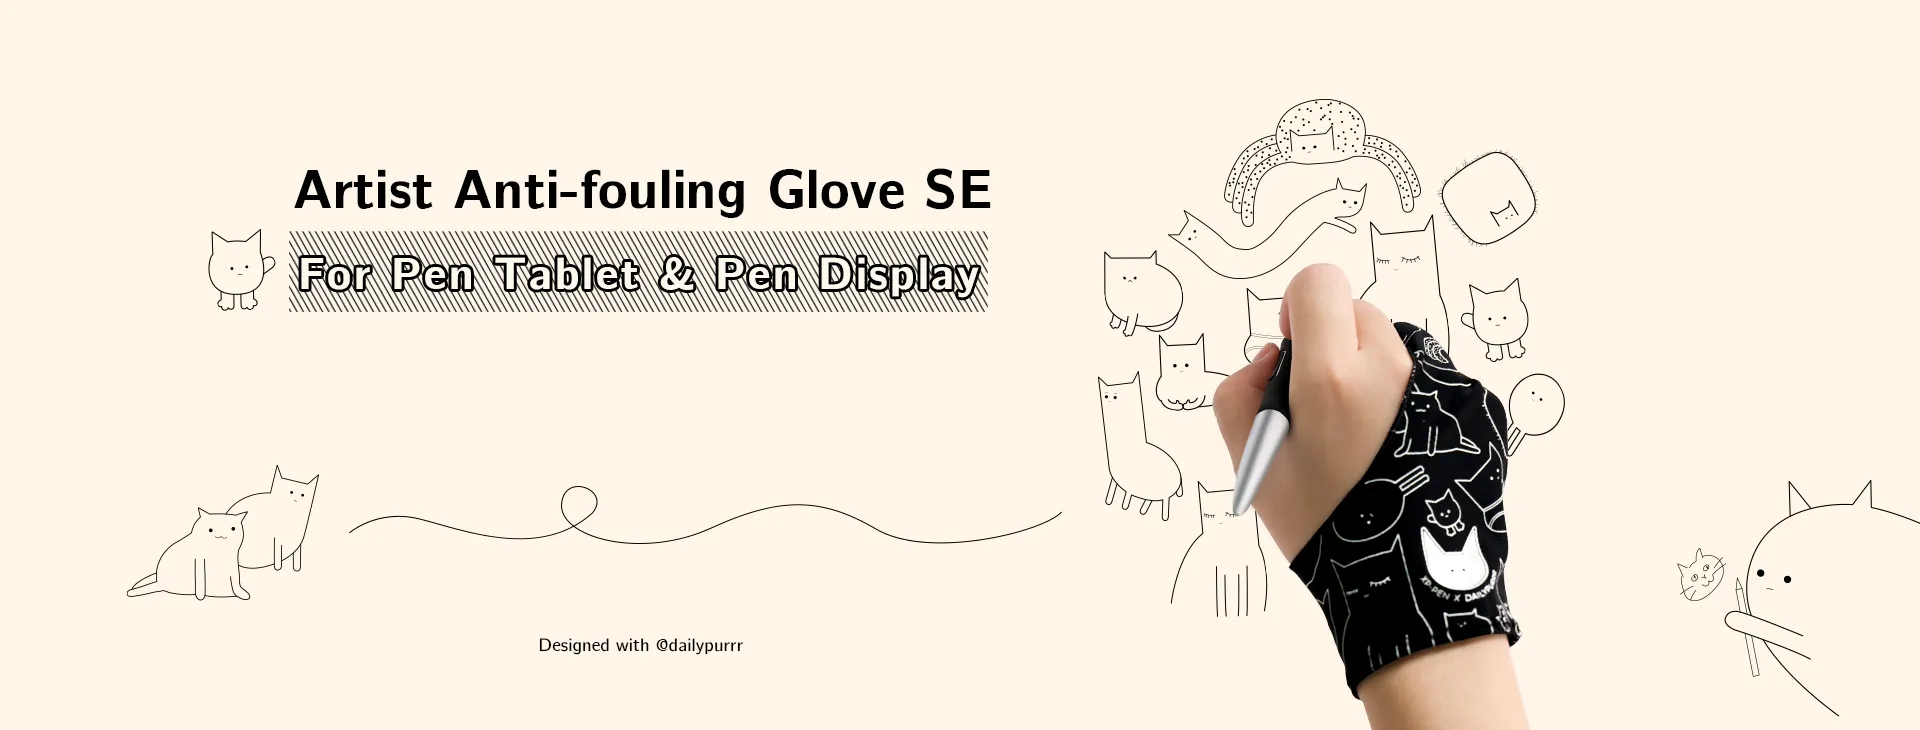 Anti Fouling Artist Glove Drawing, Gloves Drawing Tablet